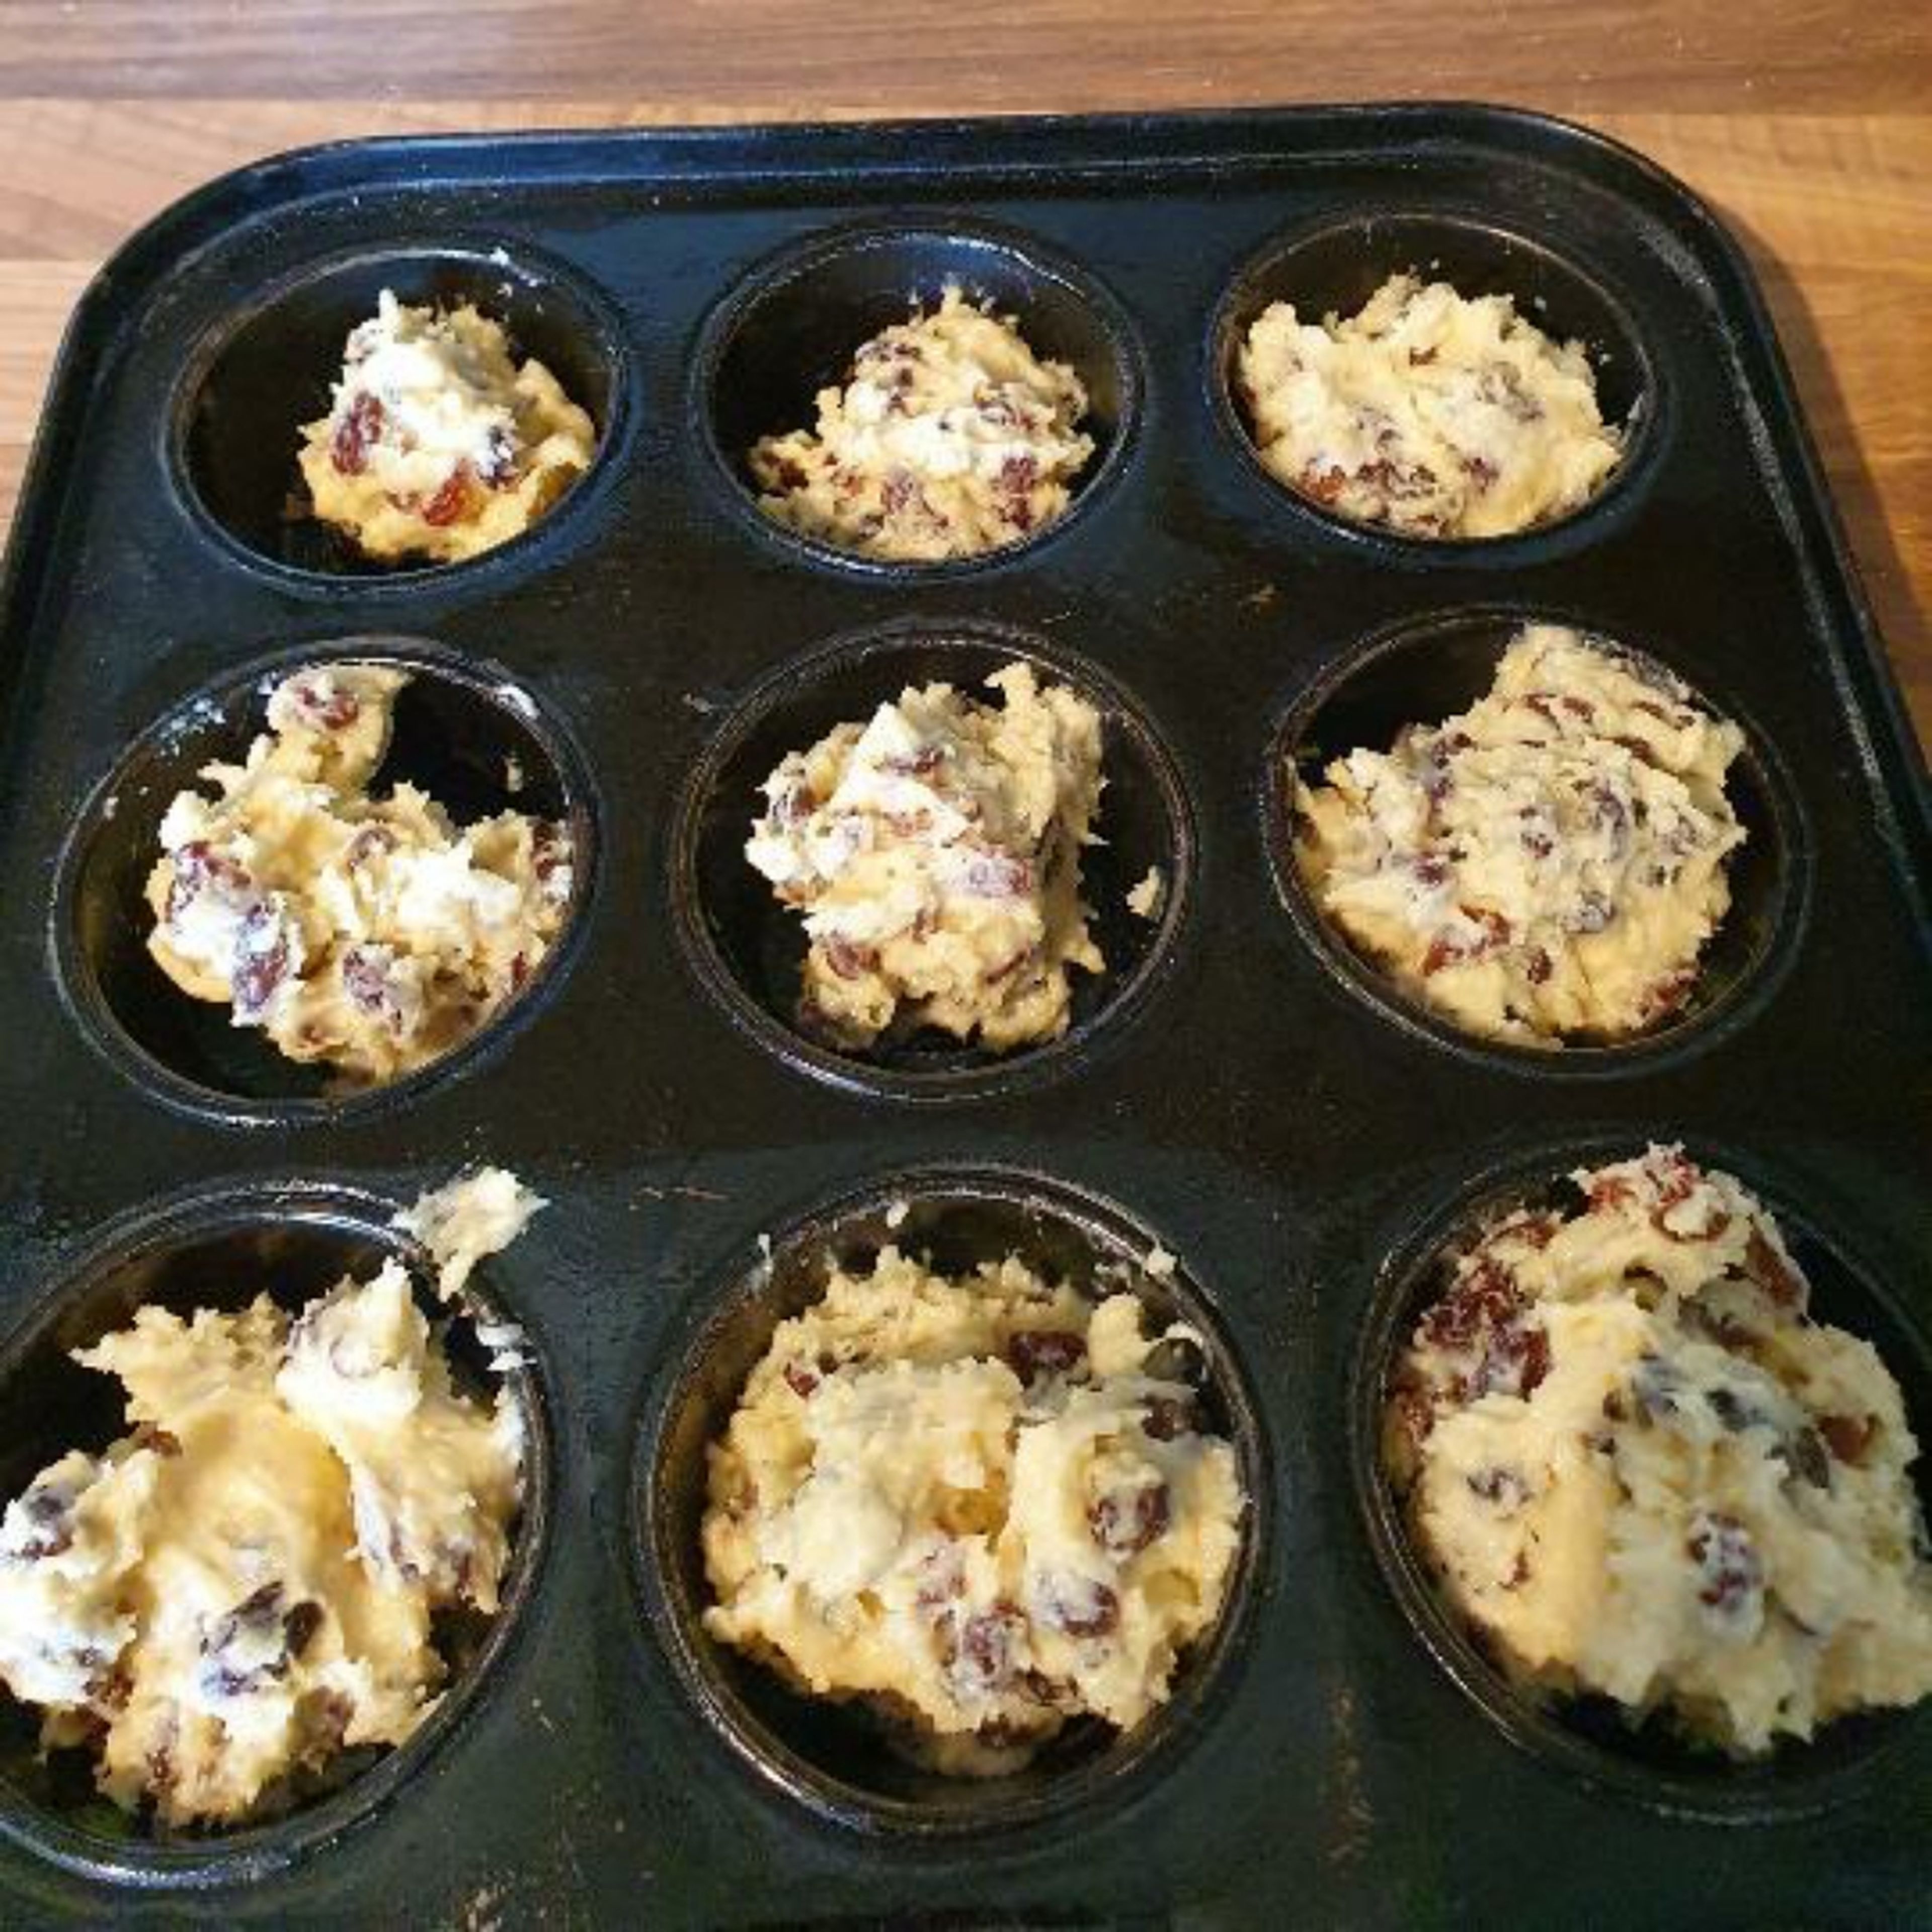 Grease a muffin tin with a non stick cooking tray or with butter. Place pieces of of dough in the muffin tray. Make sure to ore hear the oven 180°C/350°F gas mark 4. bake for 15-25 minutes.